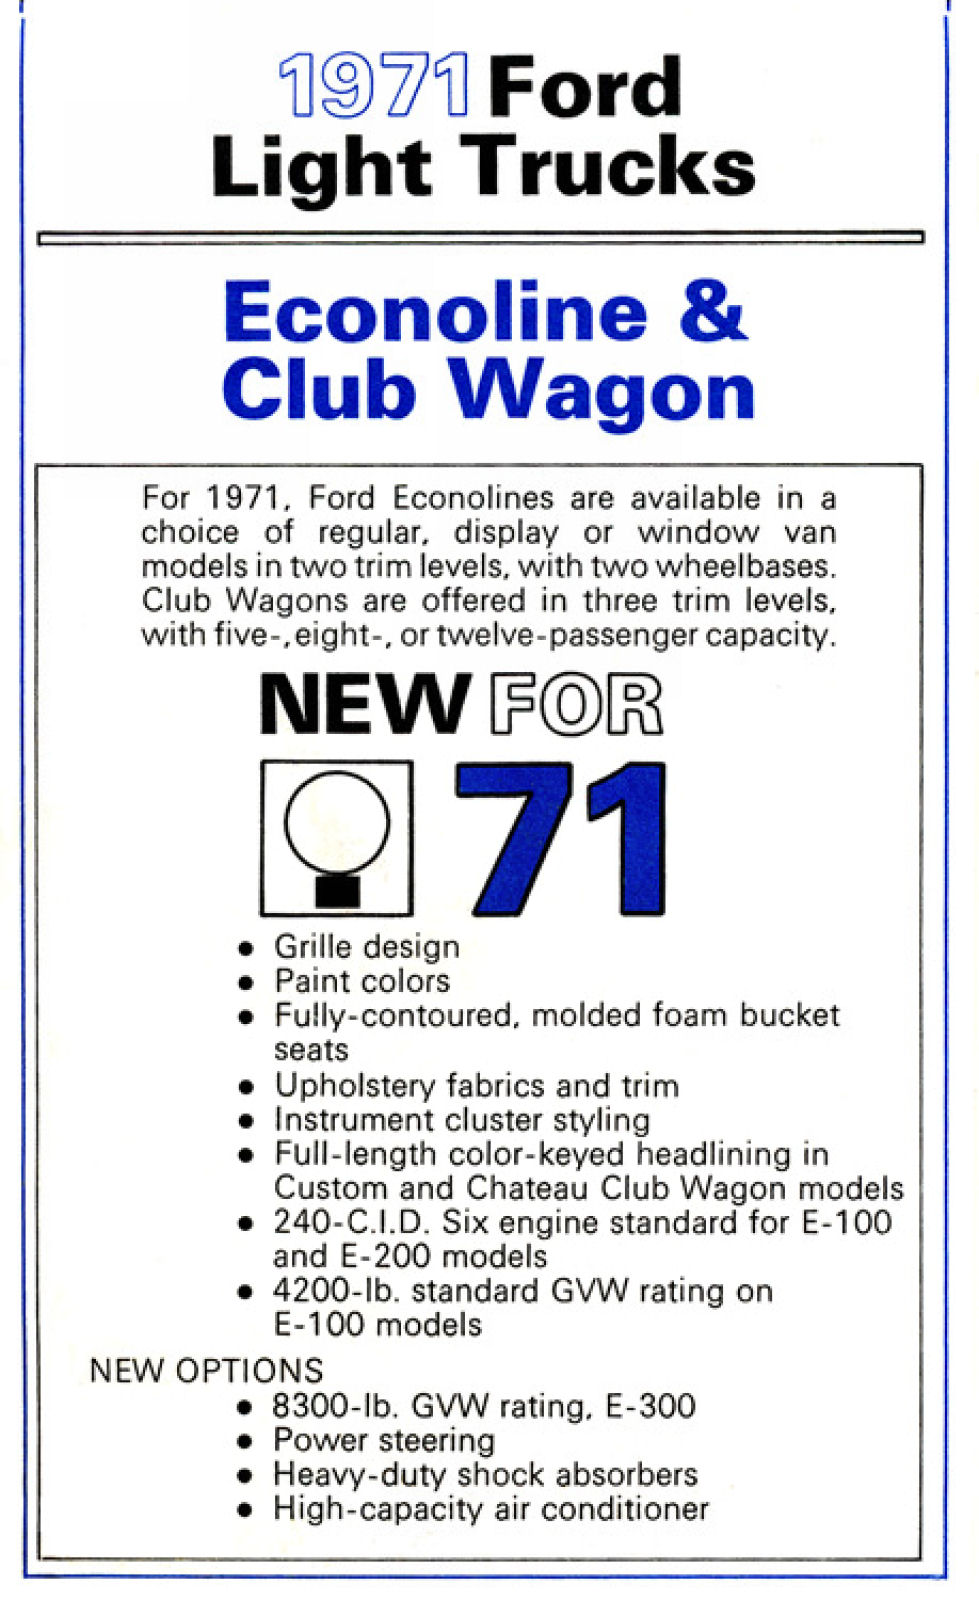 1971 Ford Product information-i12